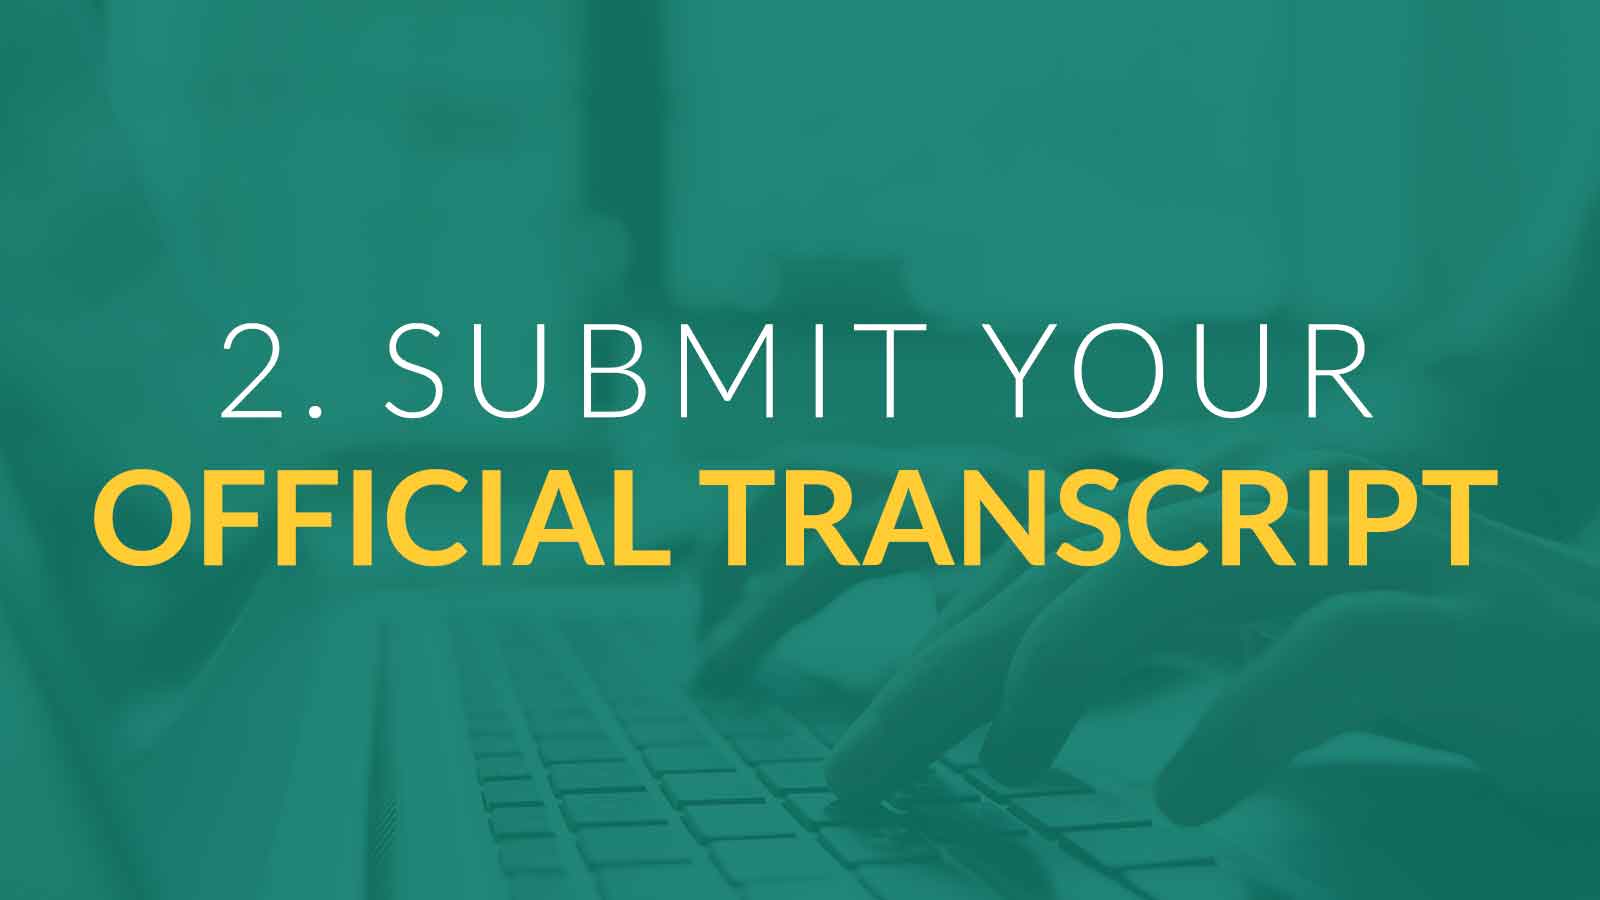 Submit your official transcript